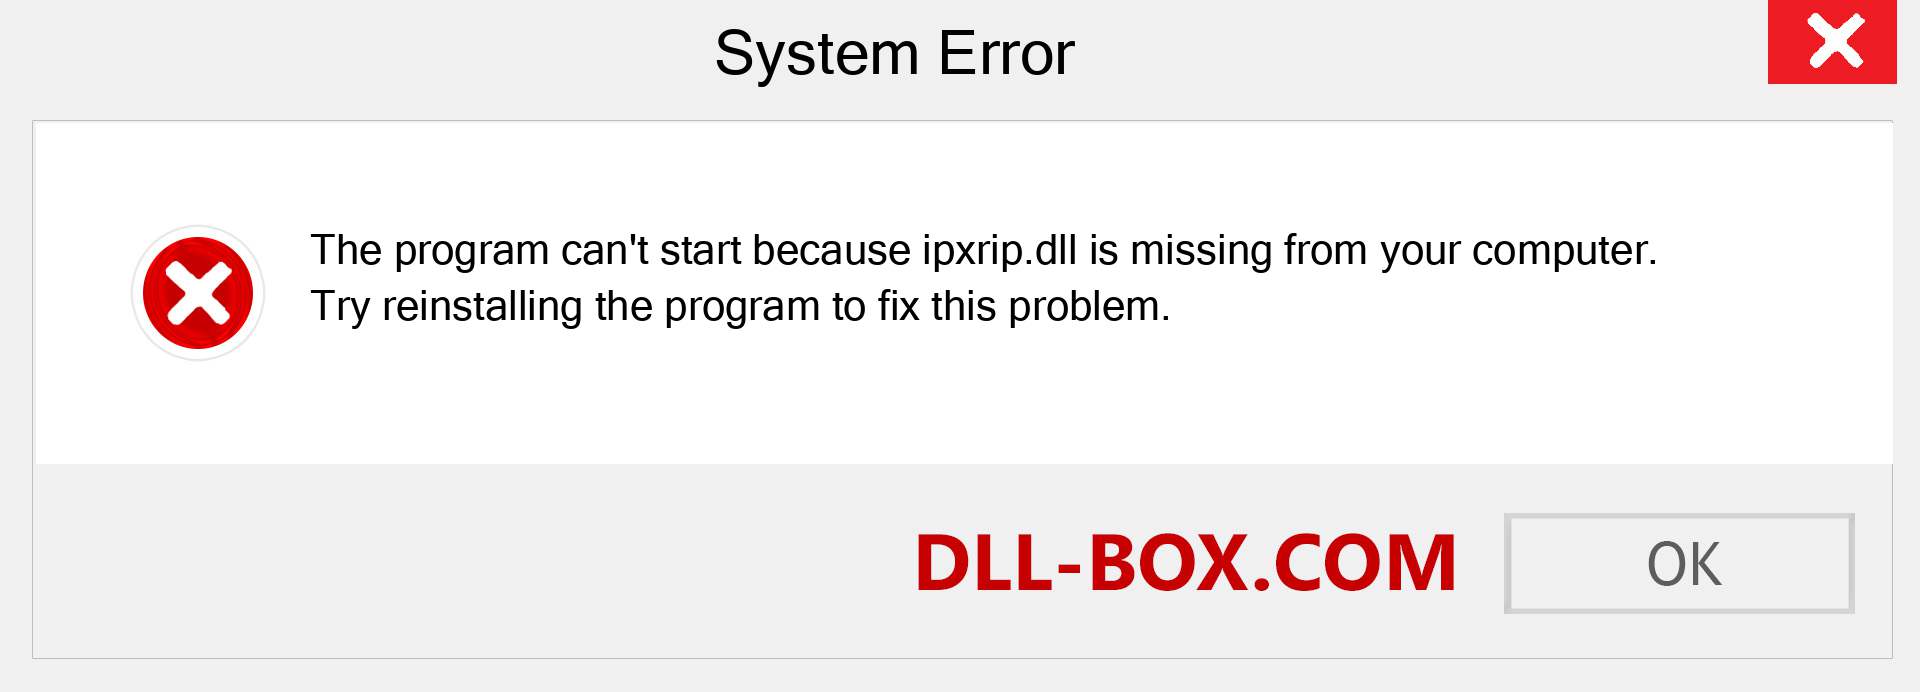  ipxrip.dll file is missing?. Download for Windows 7, 8, 10 - Fix  ipxrip dll Missing Error on Windows, photos, images